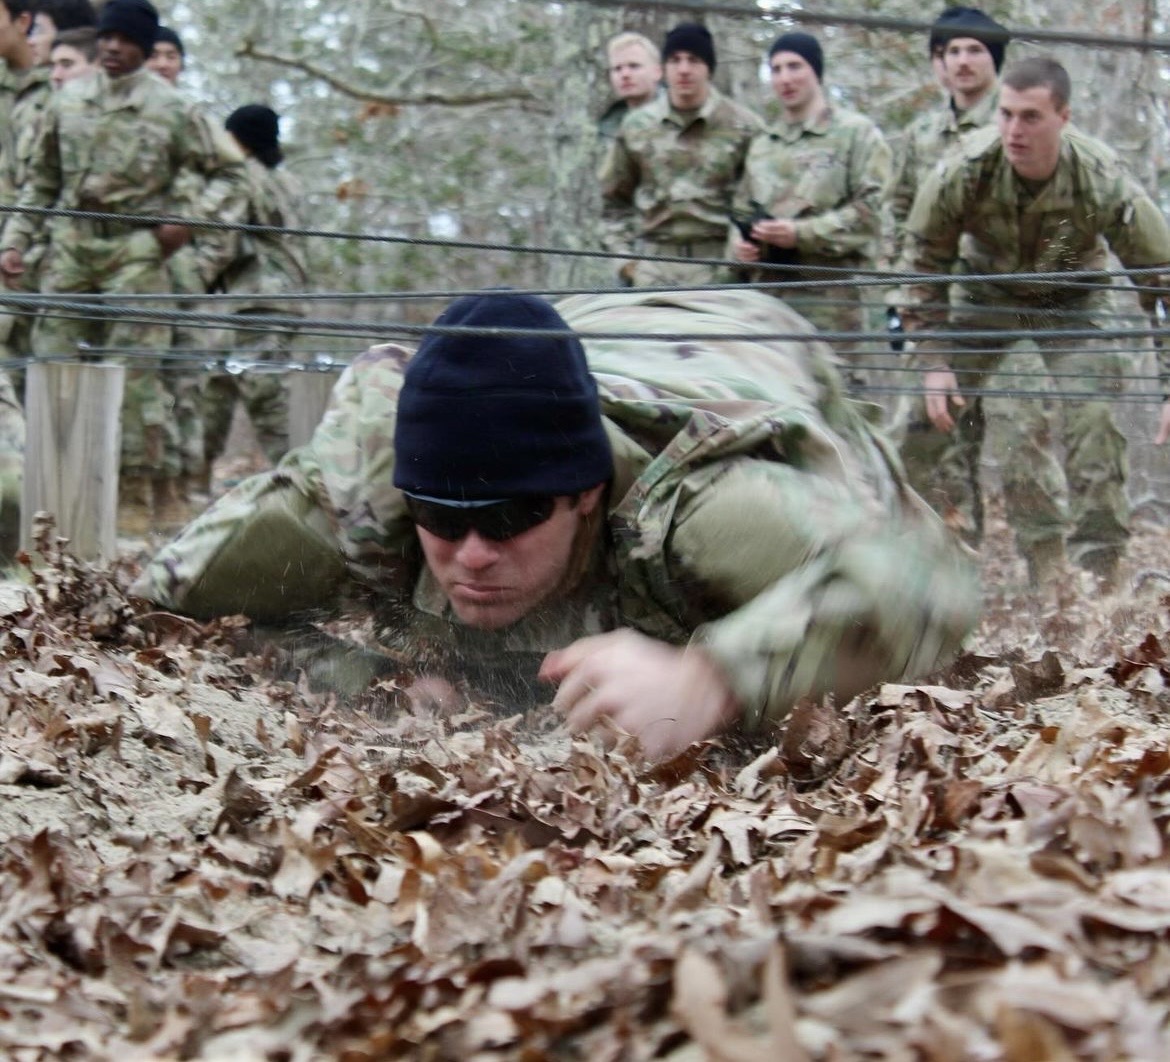 Cadets test their agility on the obstacle course during joint field training exercises.